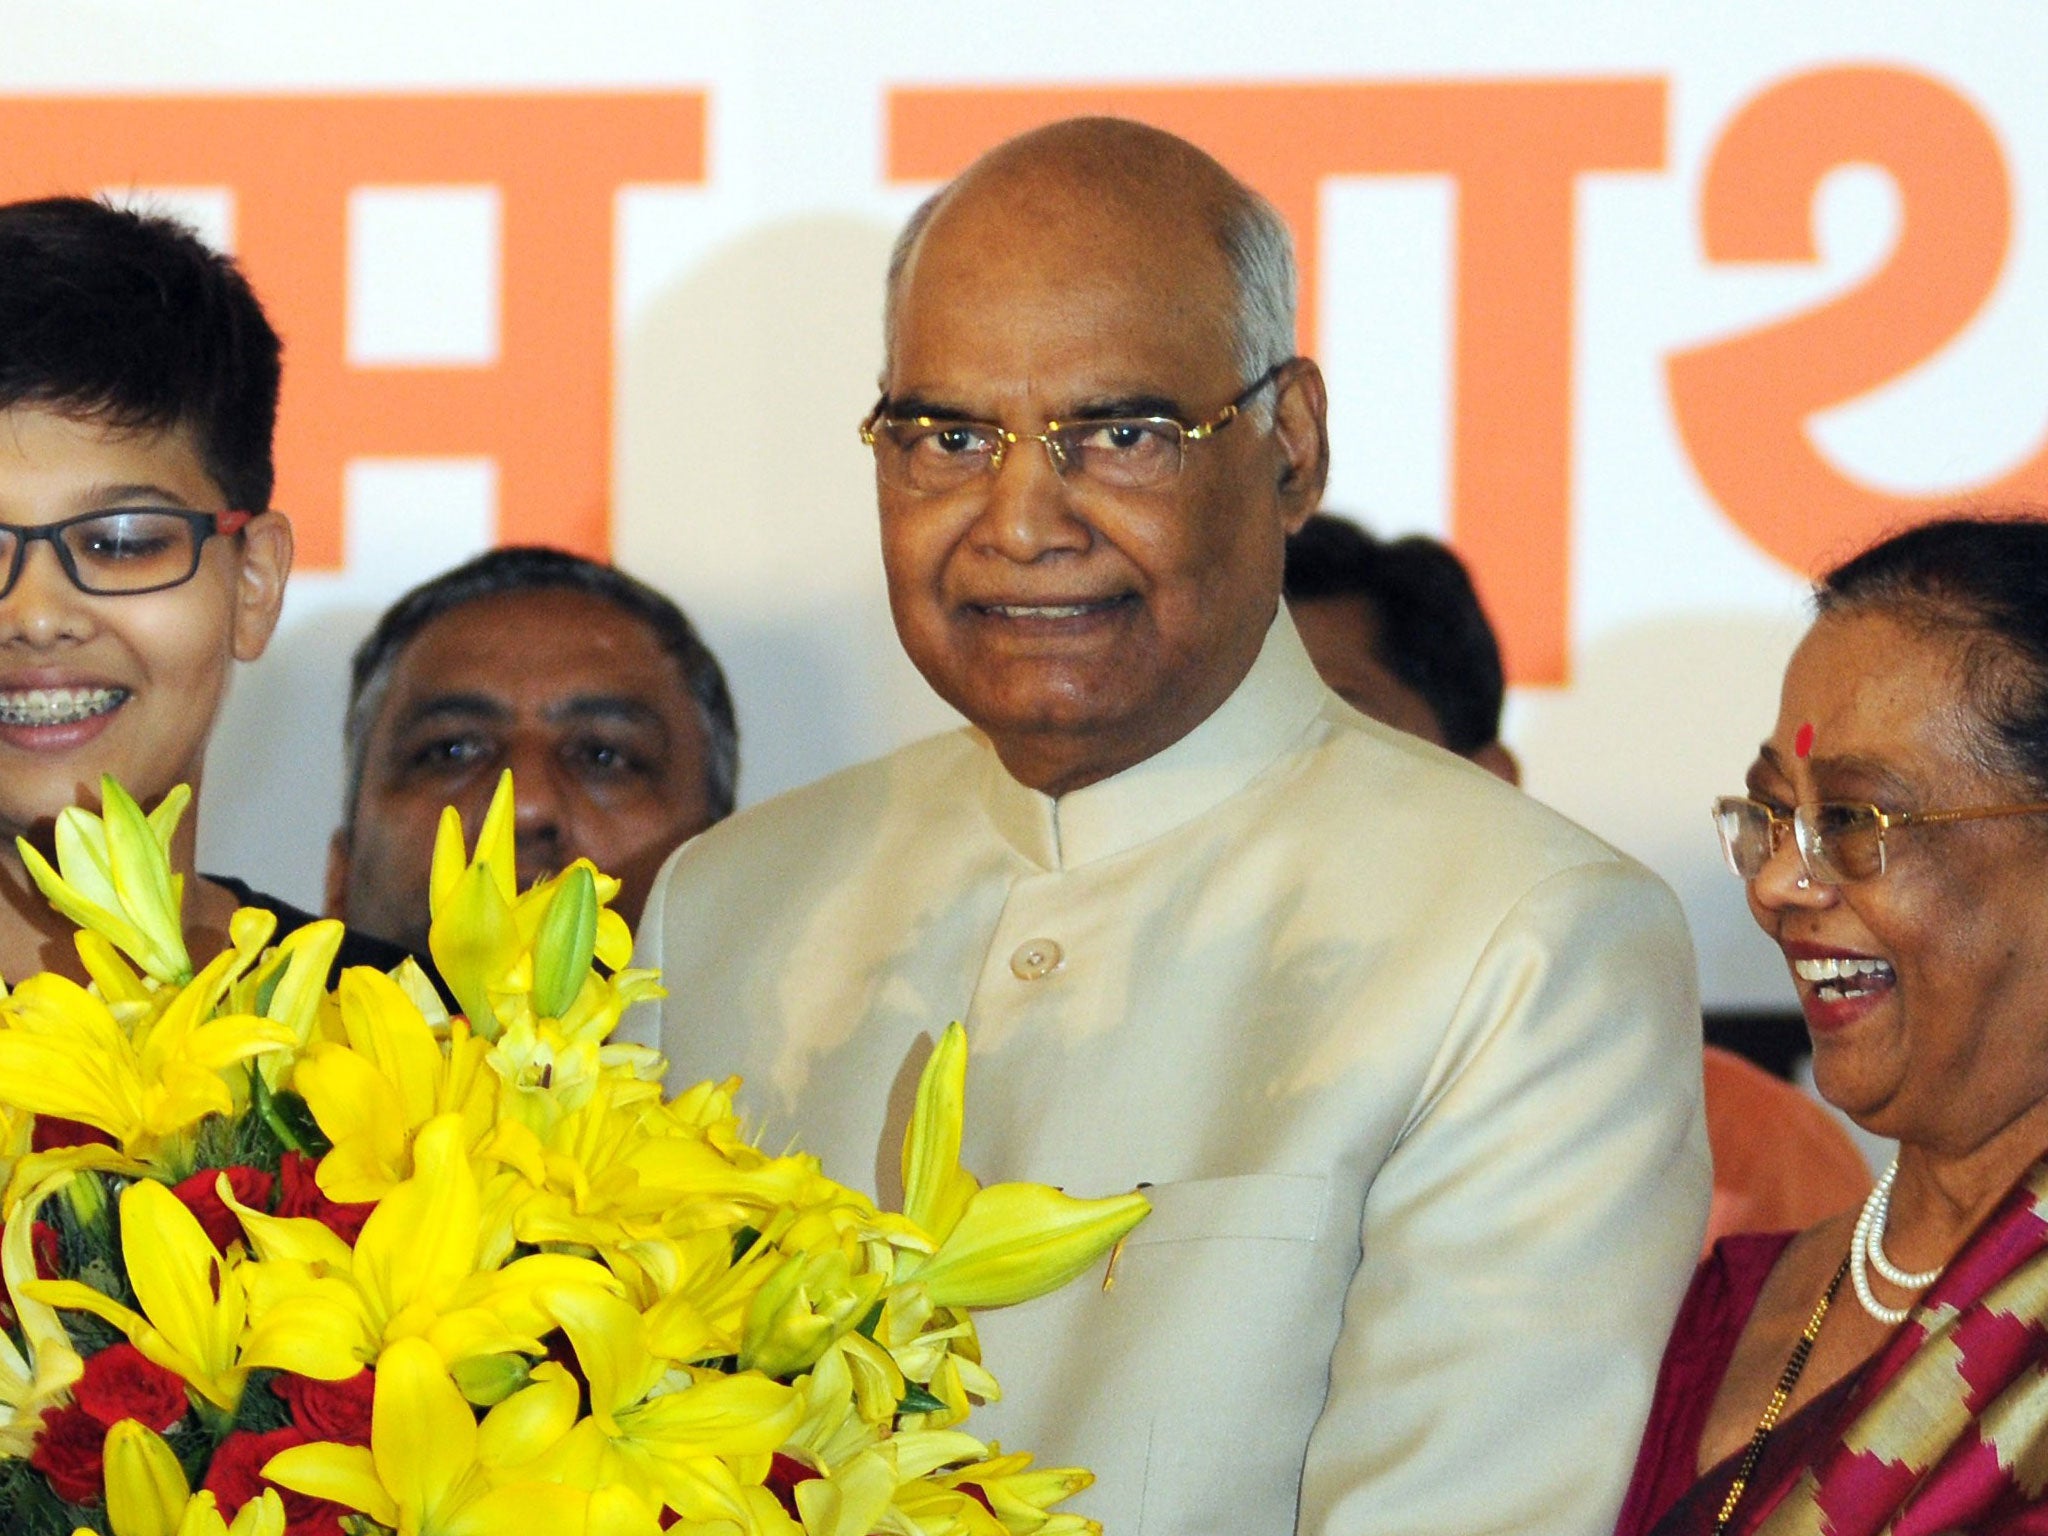 Newly elected President of India, Ram Nath Kovind, stands with his wife Kavita Kovind